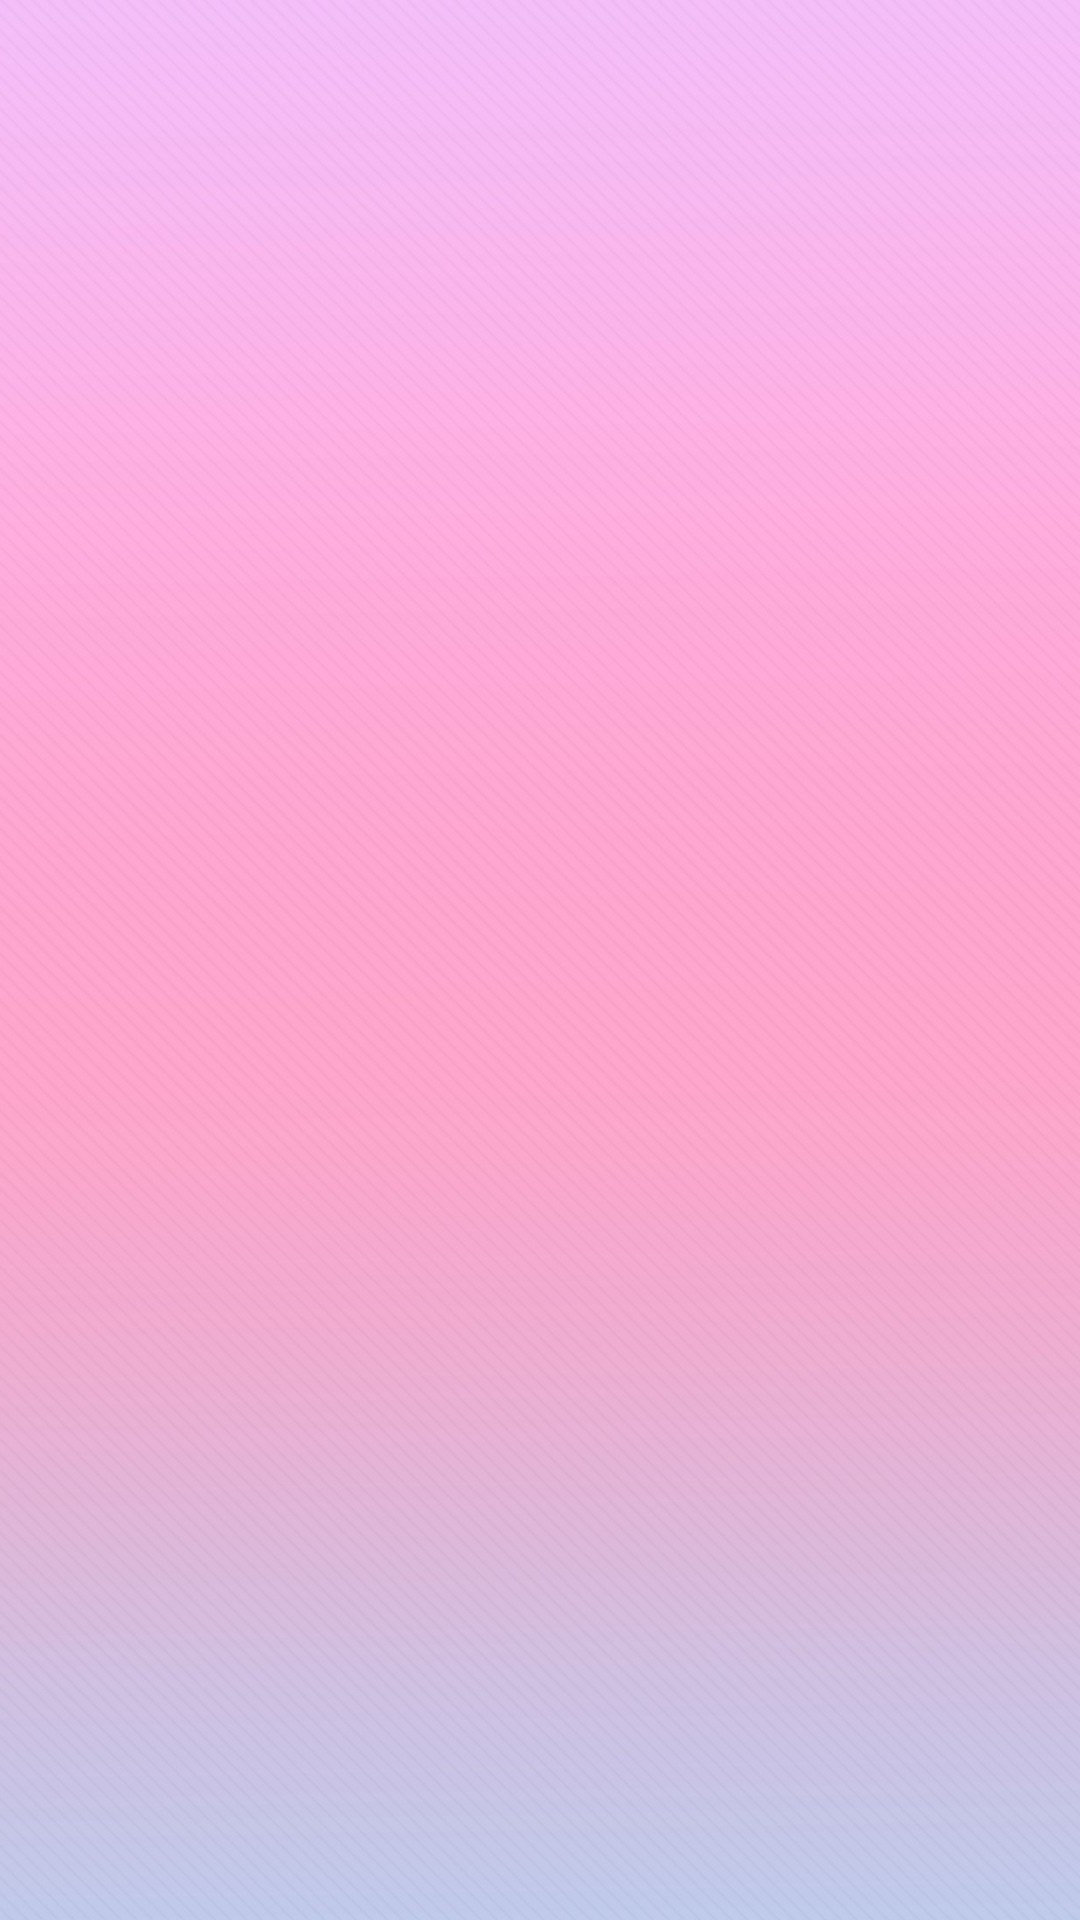 Wallpapers Phone Gradient With high-resolution 1080X1920 pixel. You can use this wallpaper for your Android backgrounds, Tablet, Samsung Screensavers, Mobile Phone Lock Screen and another Smartphones device